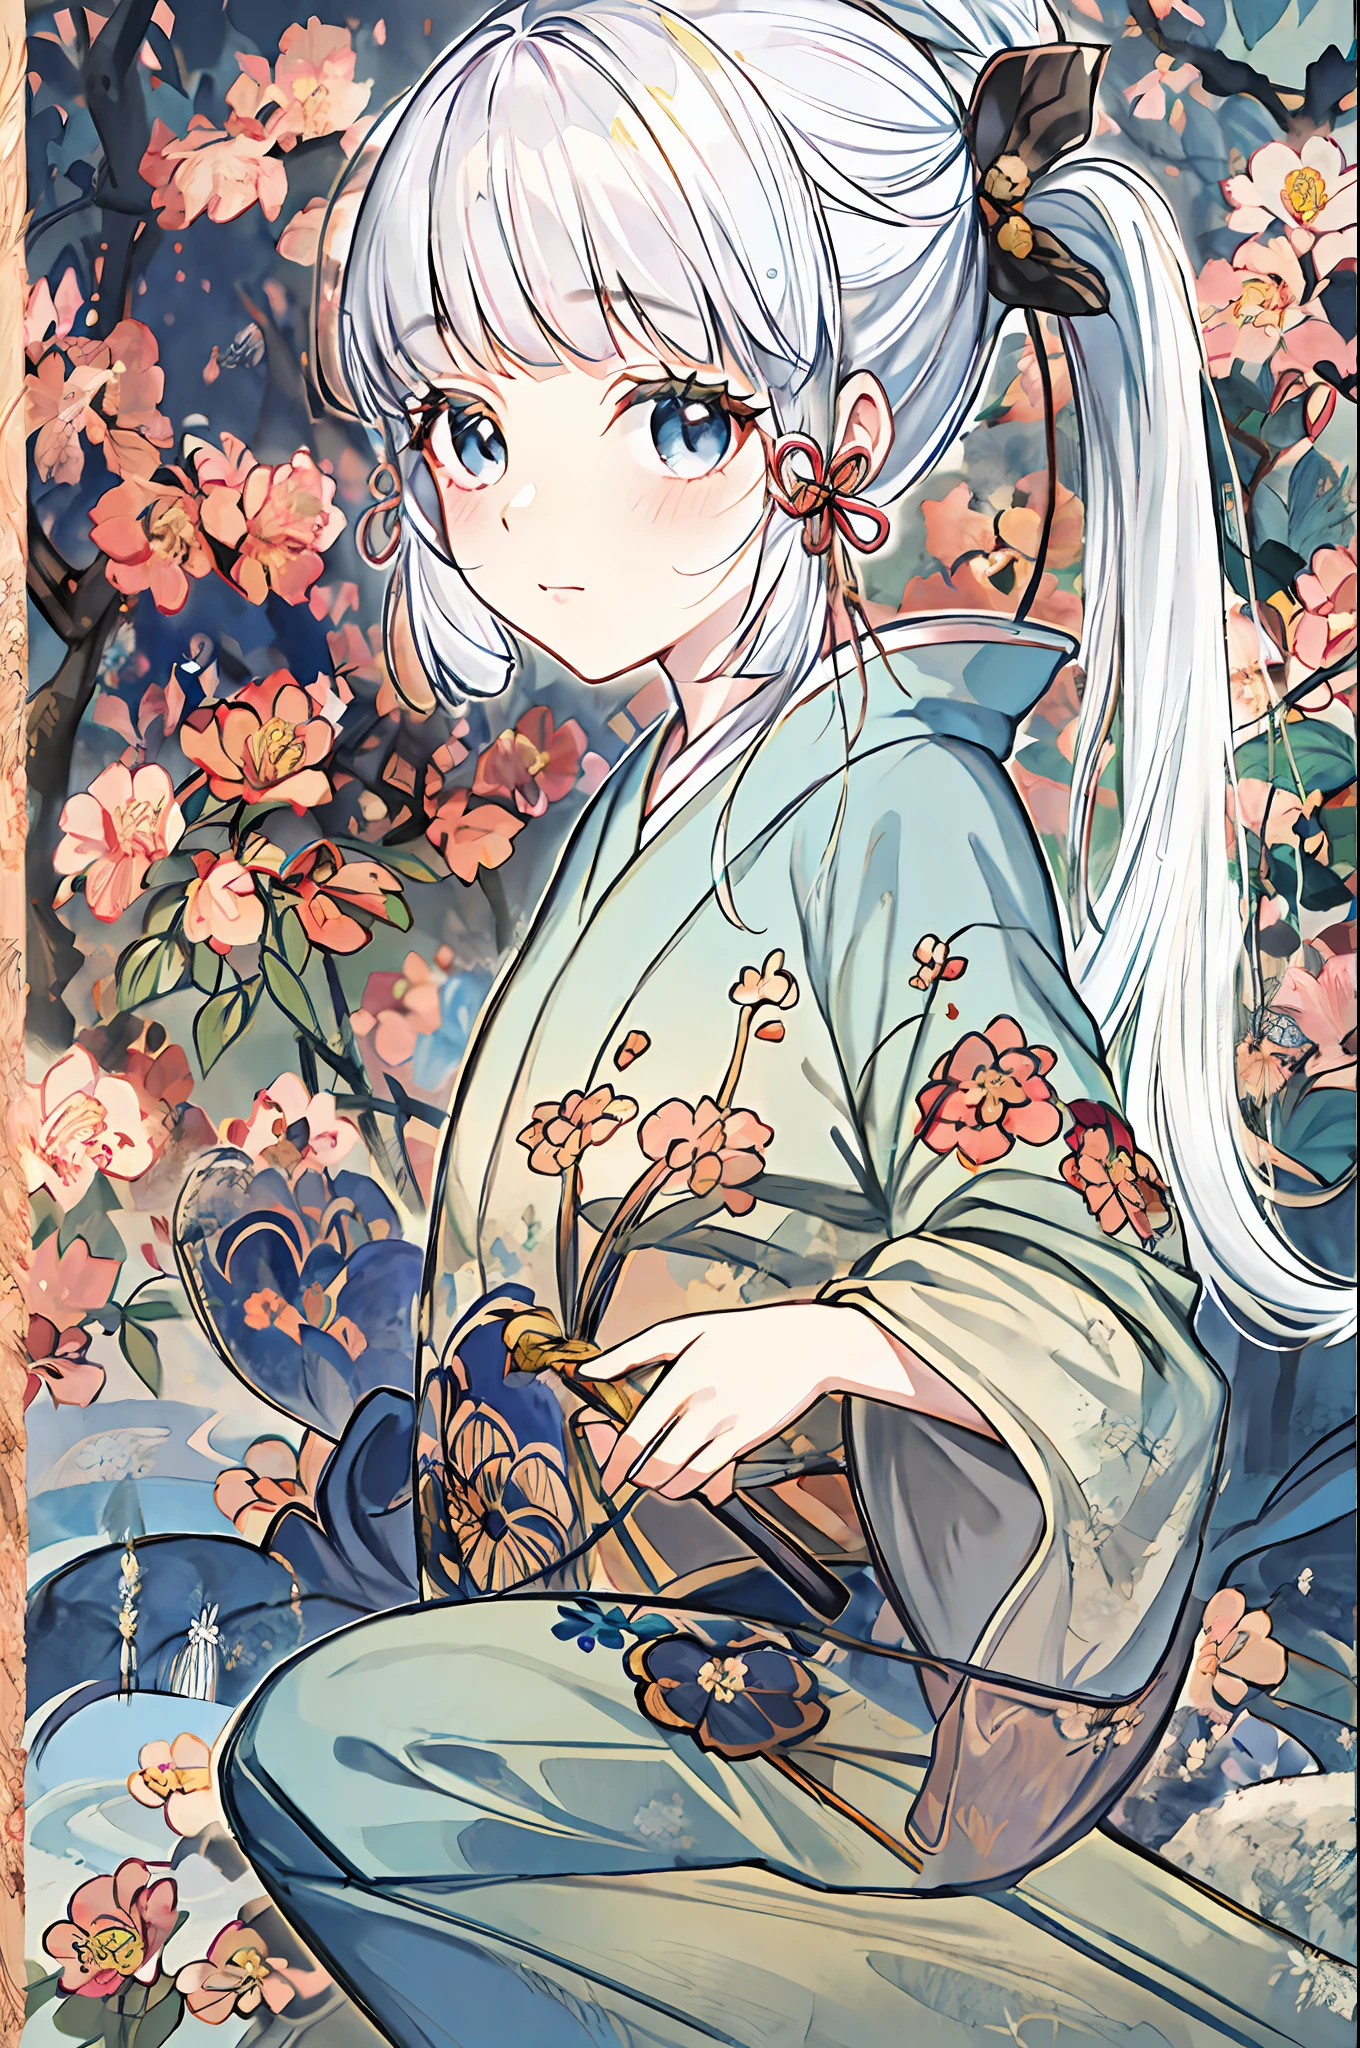 in kimono,(whitehair,Qi bangs:1.2),(loli face:1.1),Delicate face,(Peach blossom eyes:1.1),kamisato ayaka,(The painting style is cute:1.1),Ayaka,kamisato ayaka,view from distance,stand firm